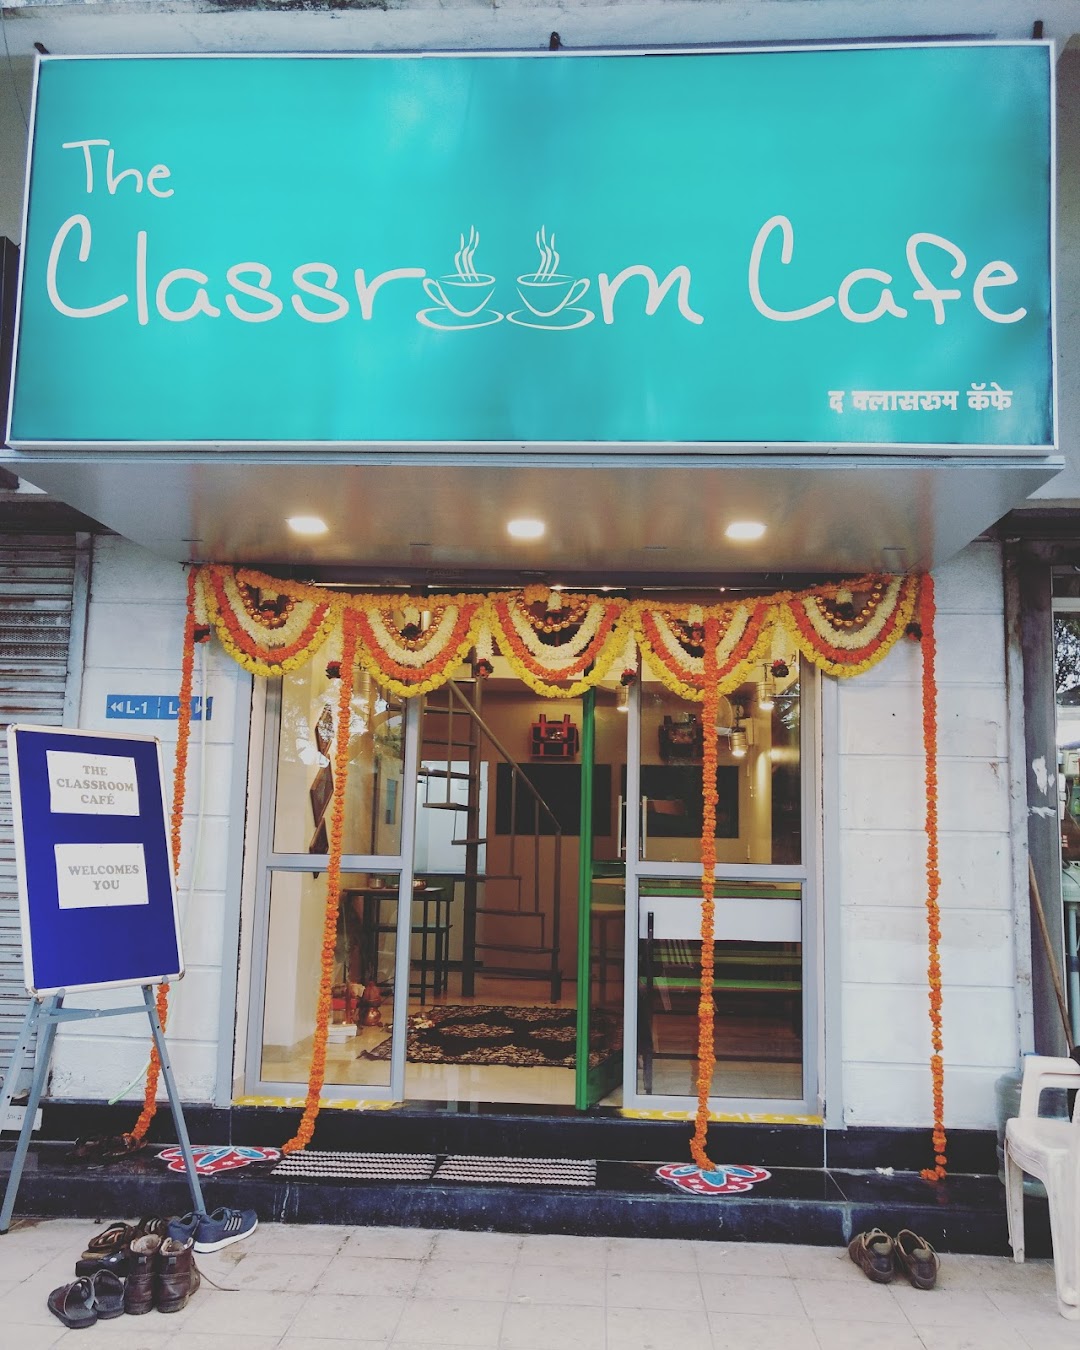 The Classroom Cafe